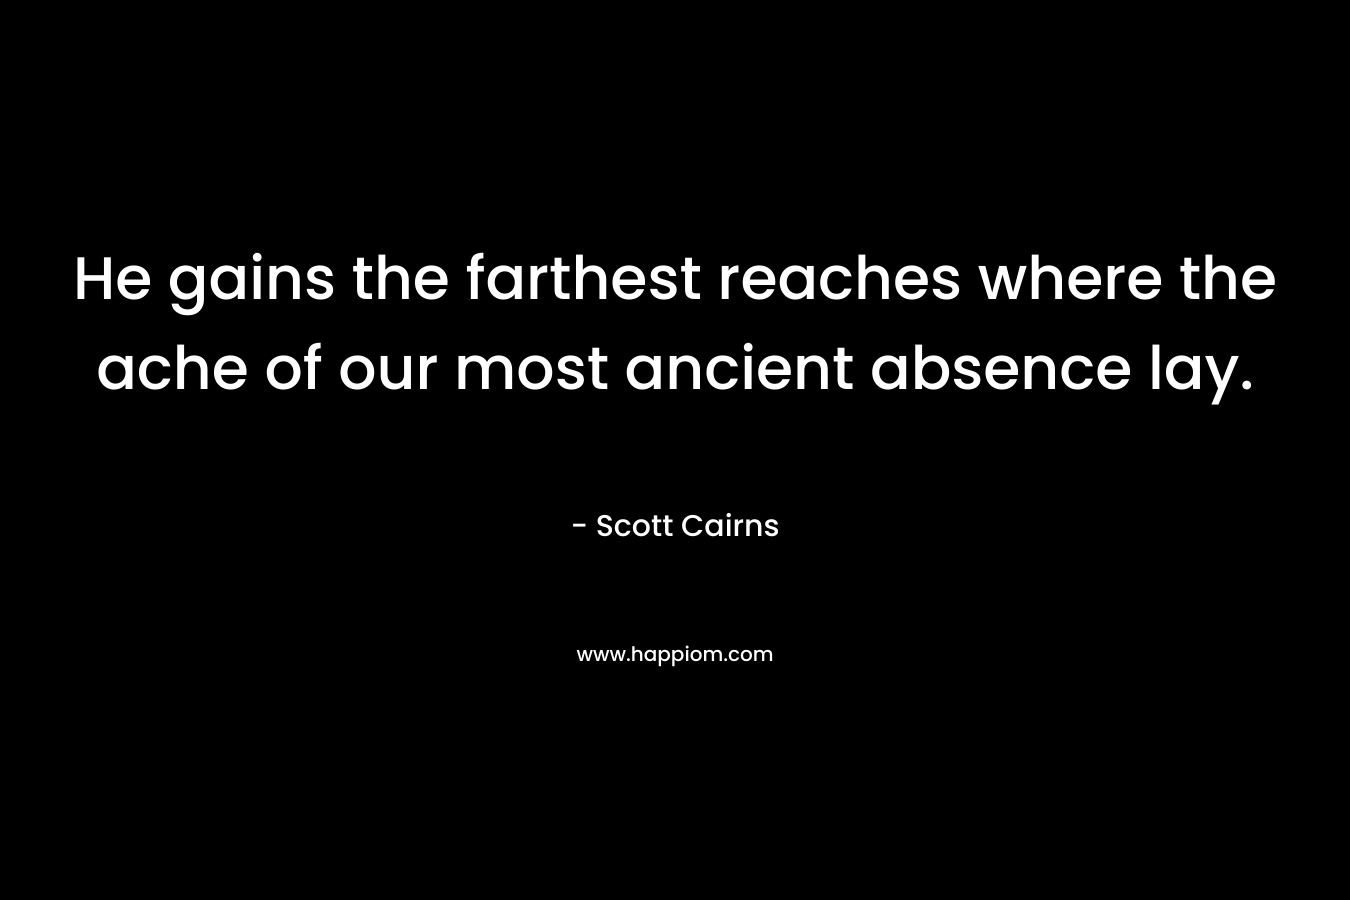 He gains the farthest reaches where the ache of our most ancient absence lay. – Scott Cairns